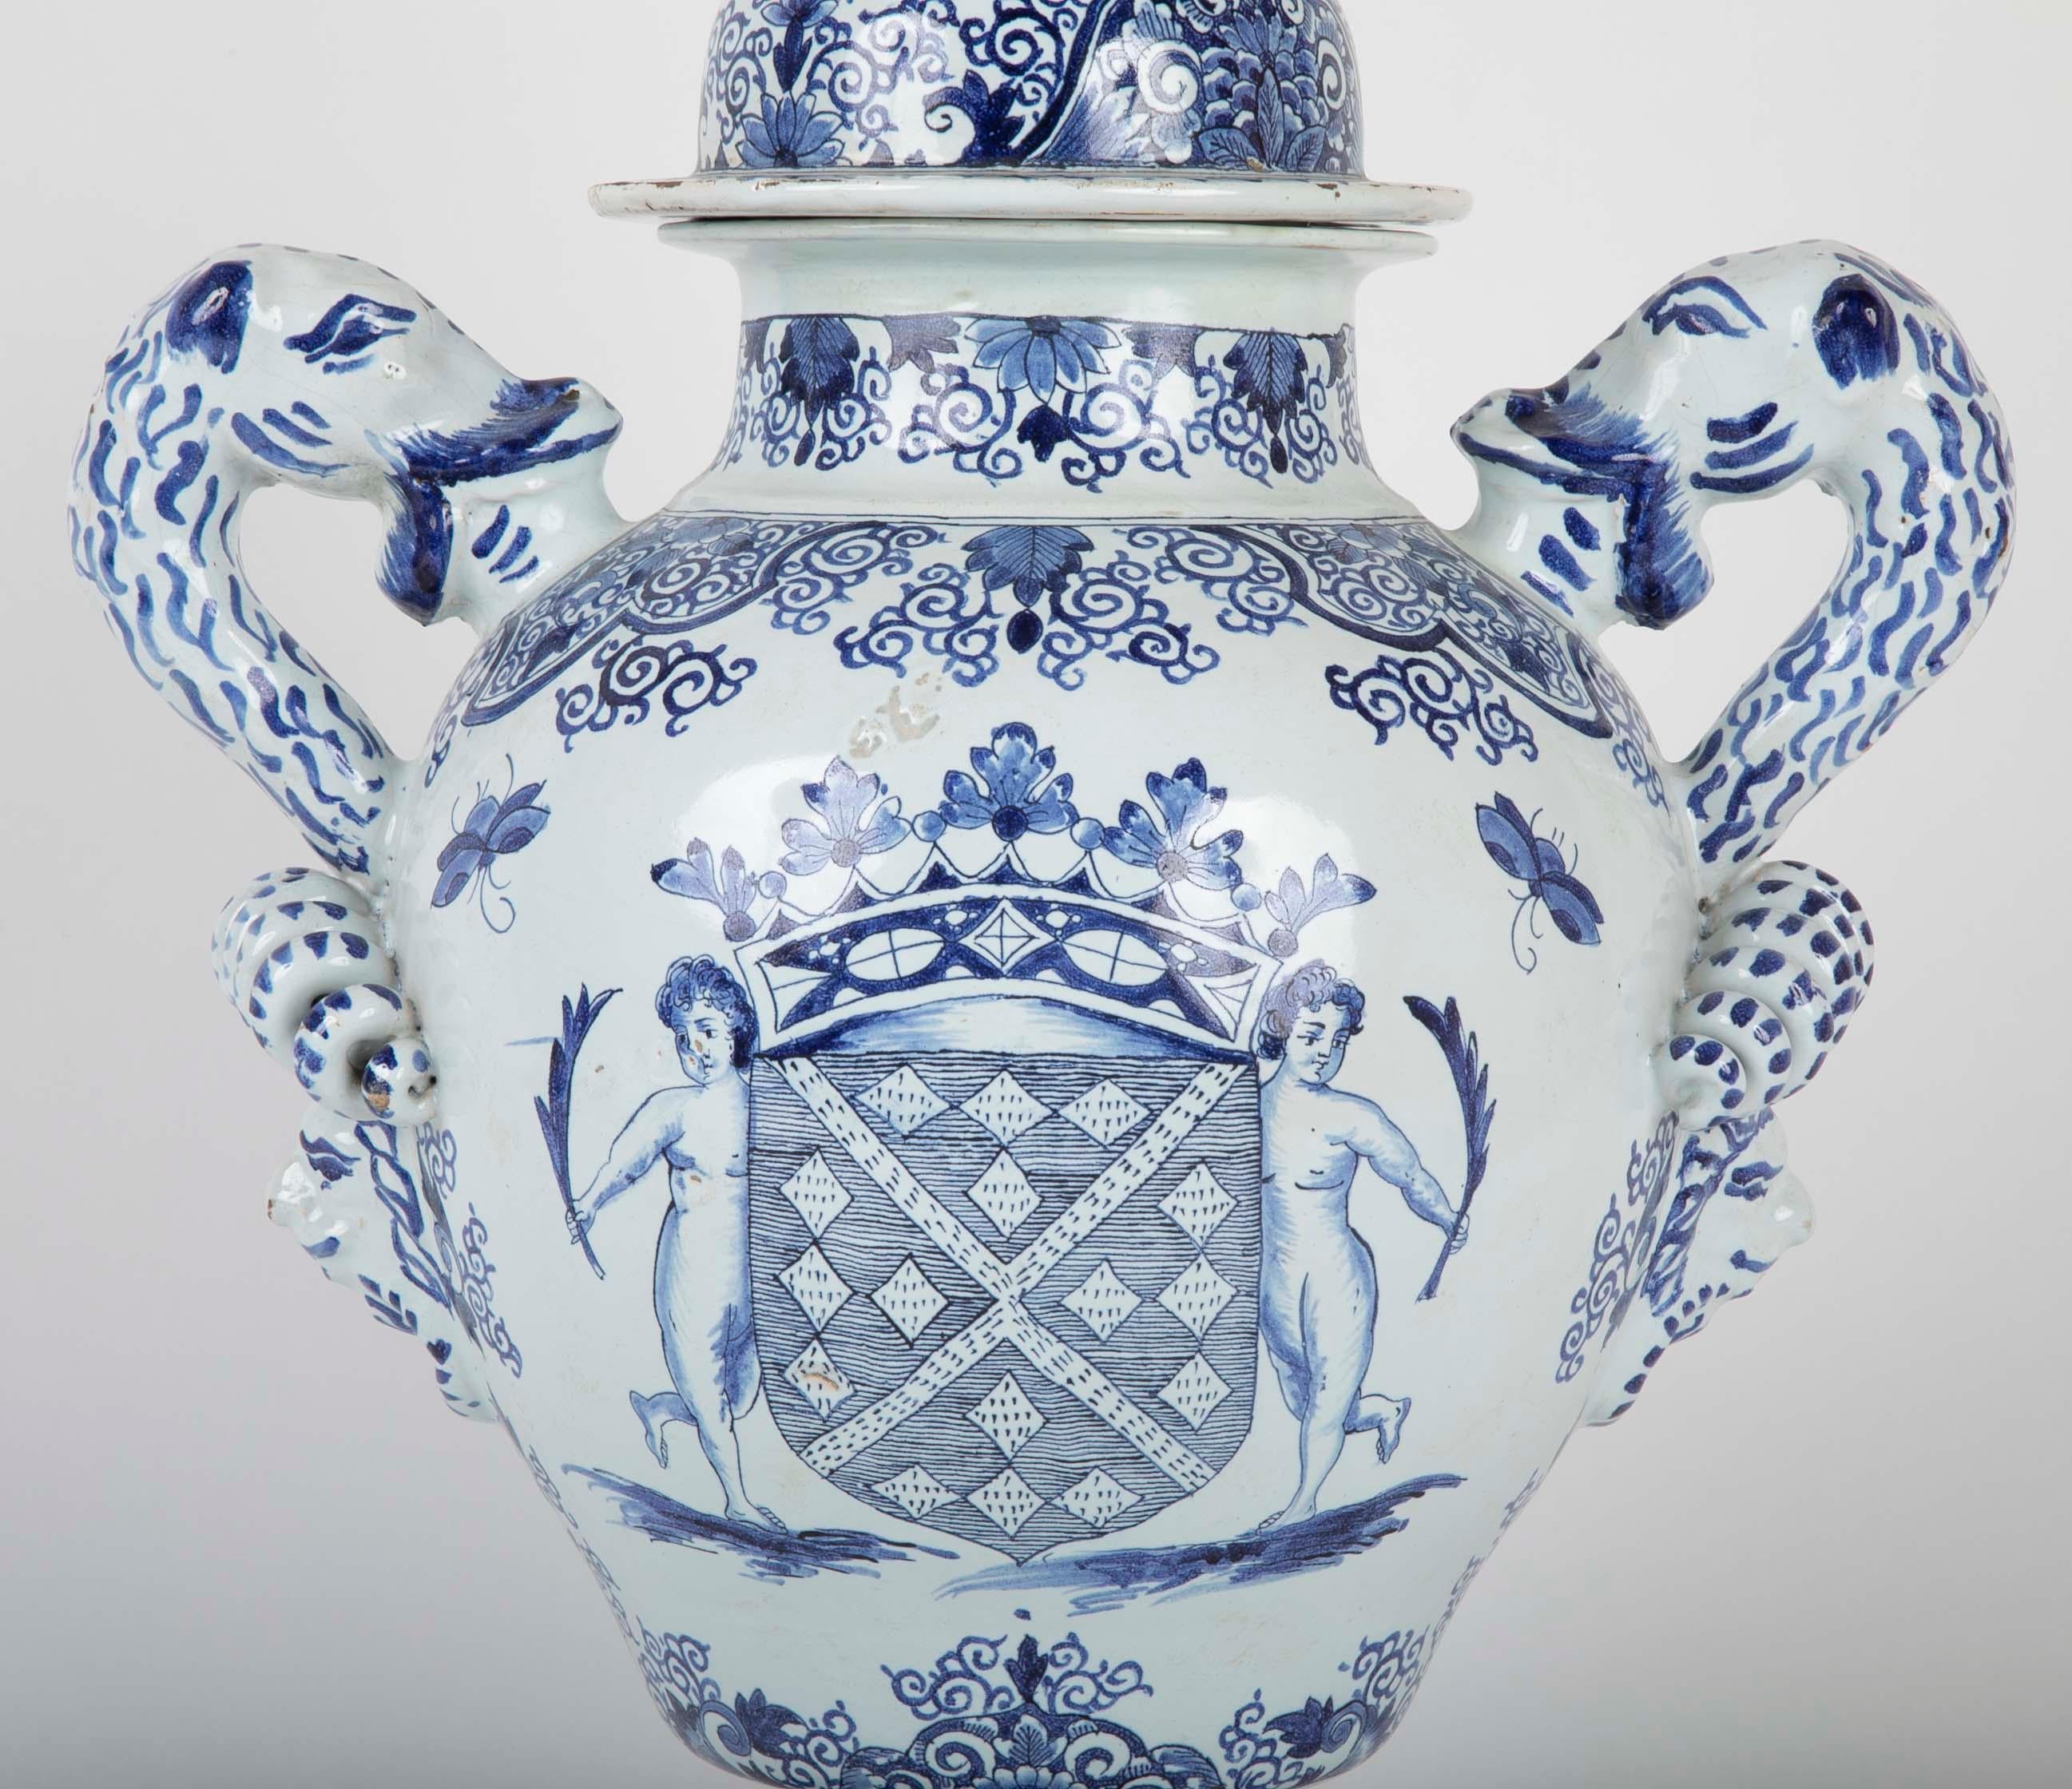 An early 19th century French faience lidded jar; probably Rouen. Painted with a heraldic crest.